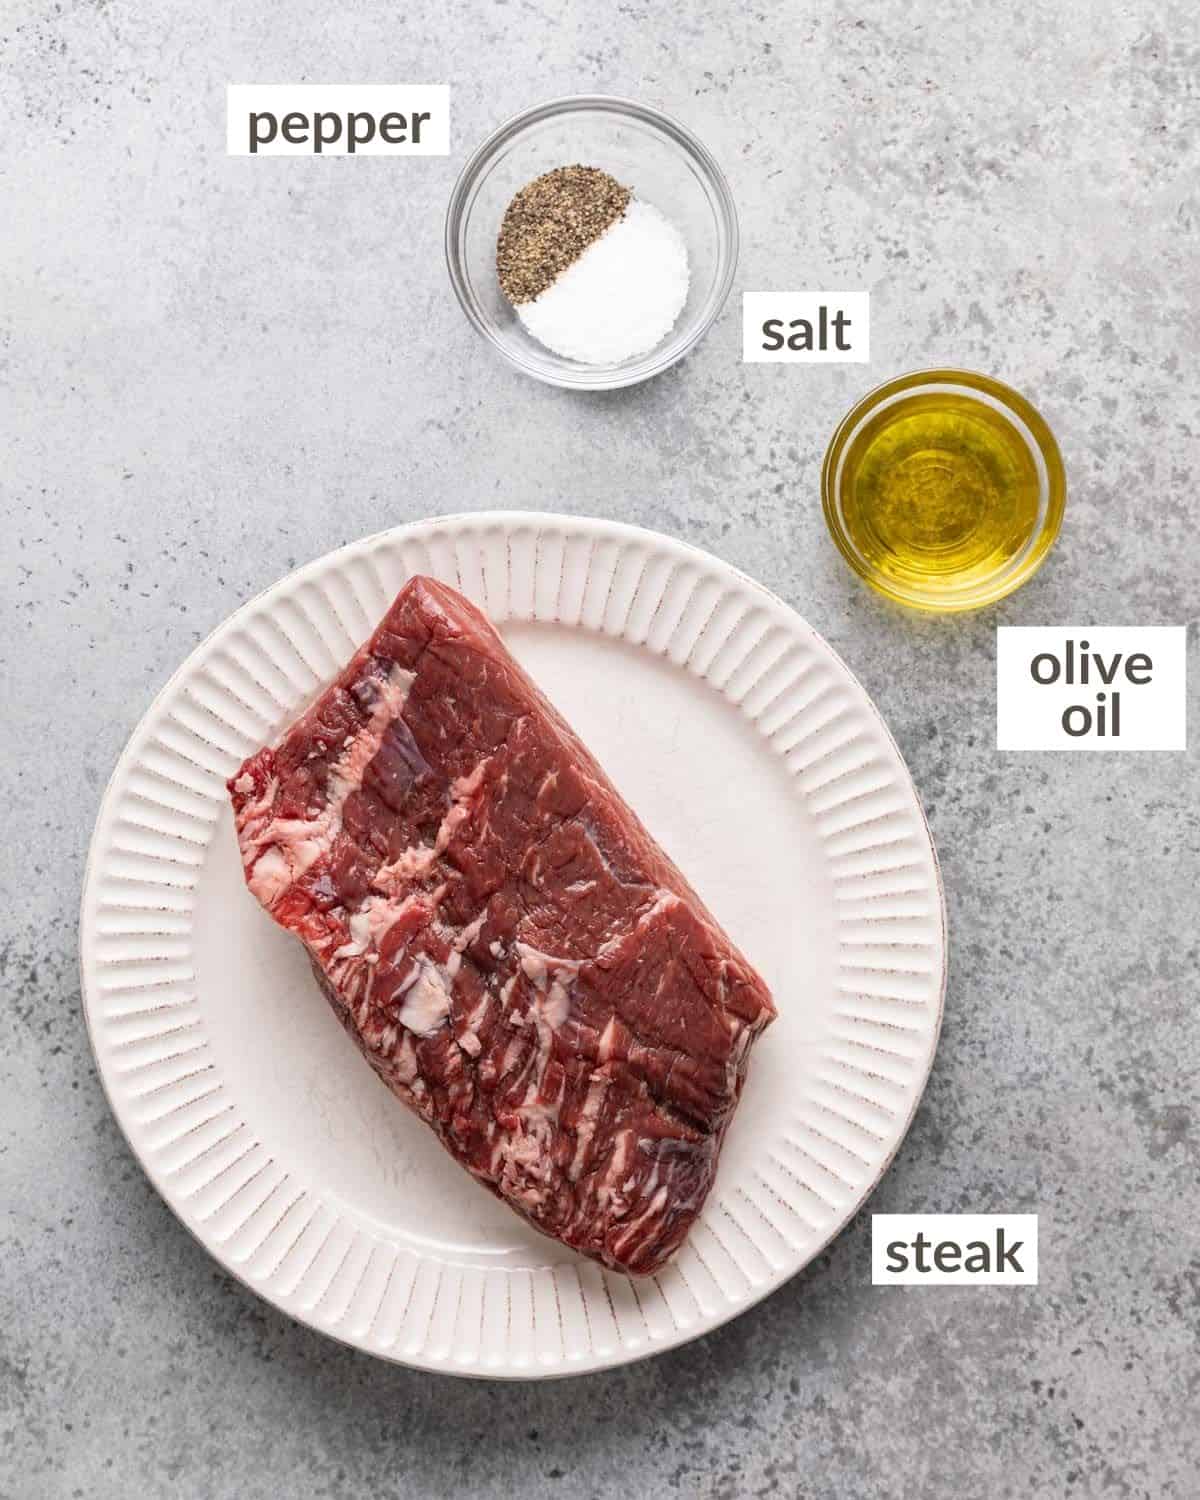 Ingredients needed to make picanha steak.